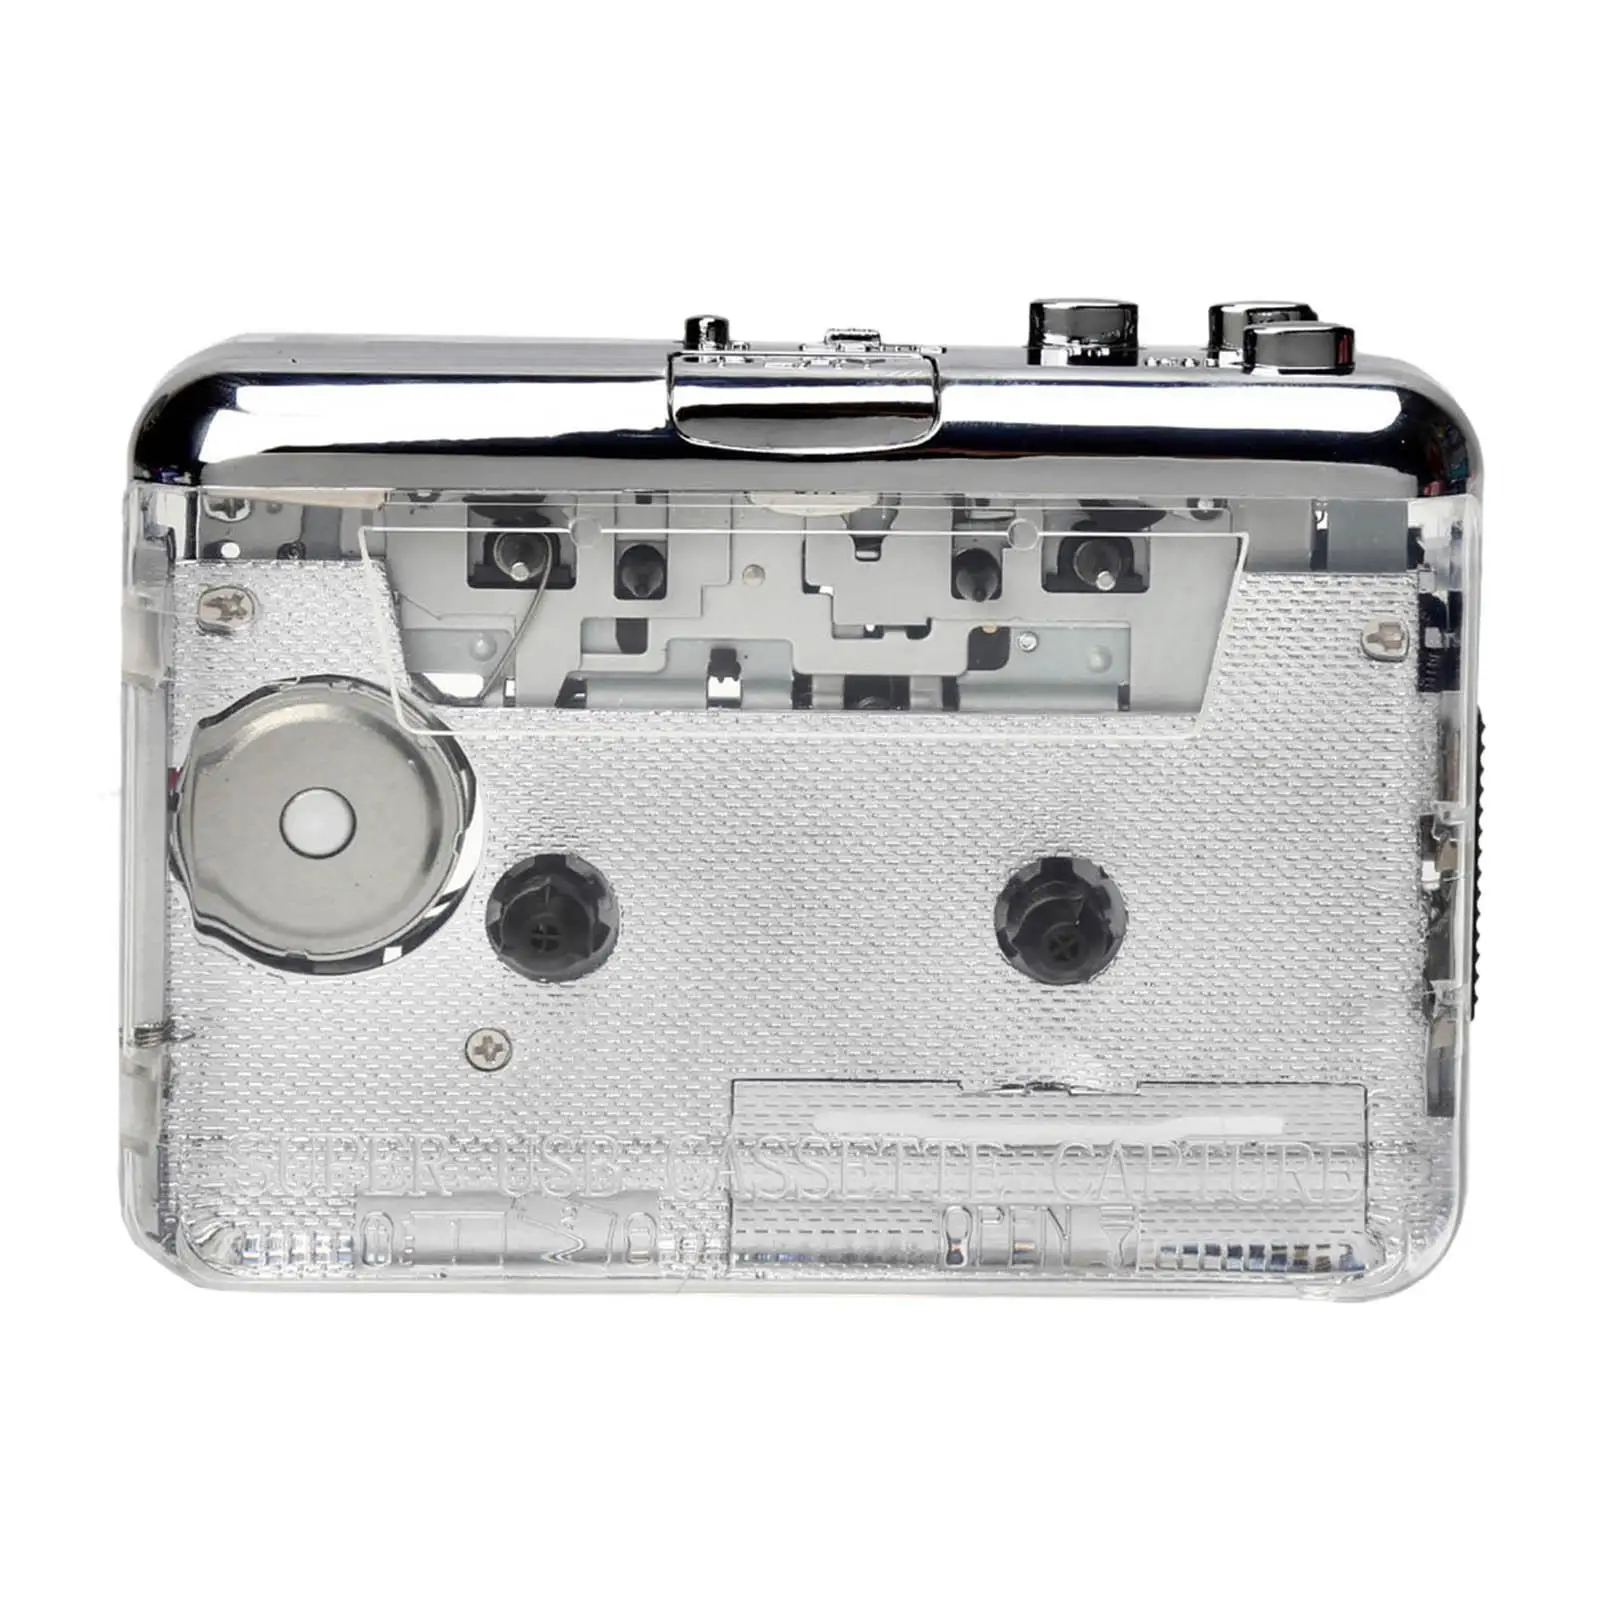 USB Cassette Tape to MP3 CD Music Cassette Player USB Cassette Tape to MP3 Converter Capture for Laptop PC Personal Computers